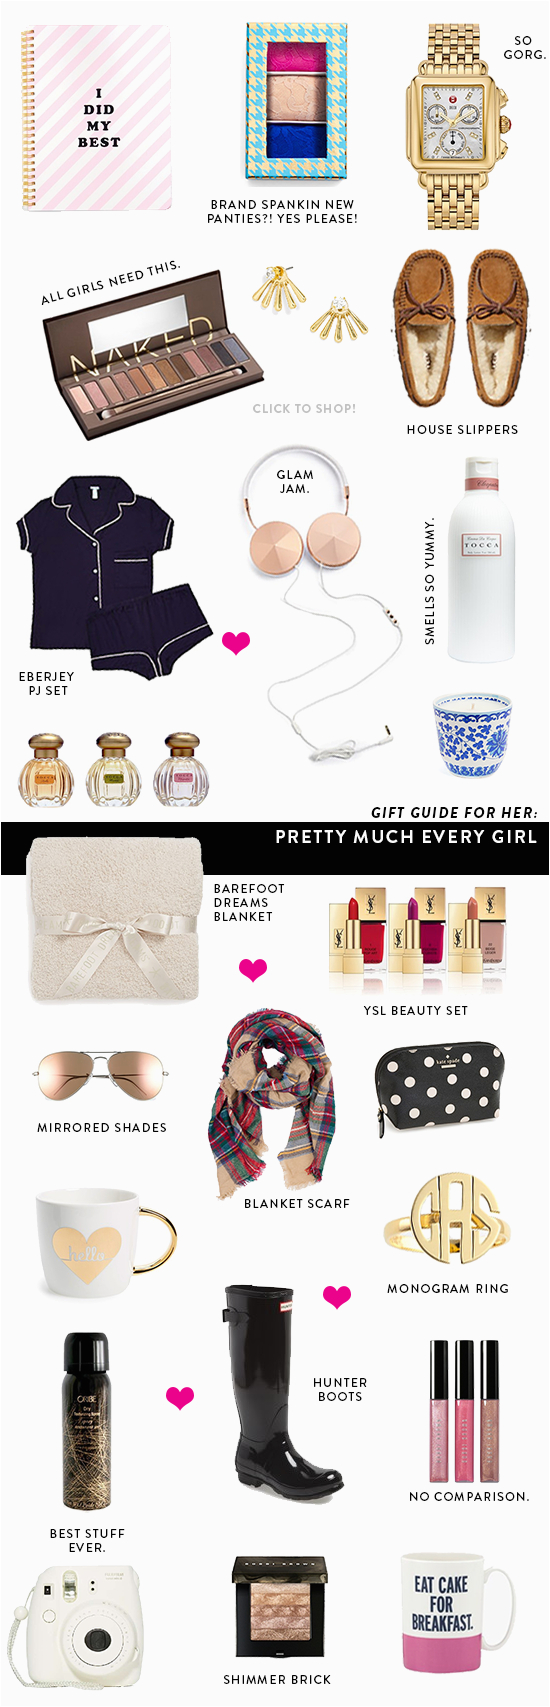 gift guide for her pretty much every girl